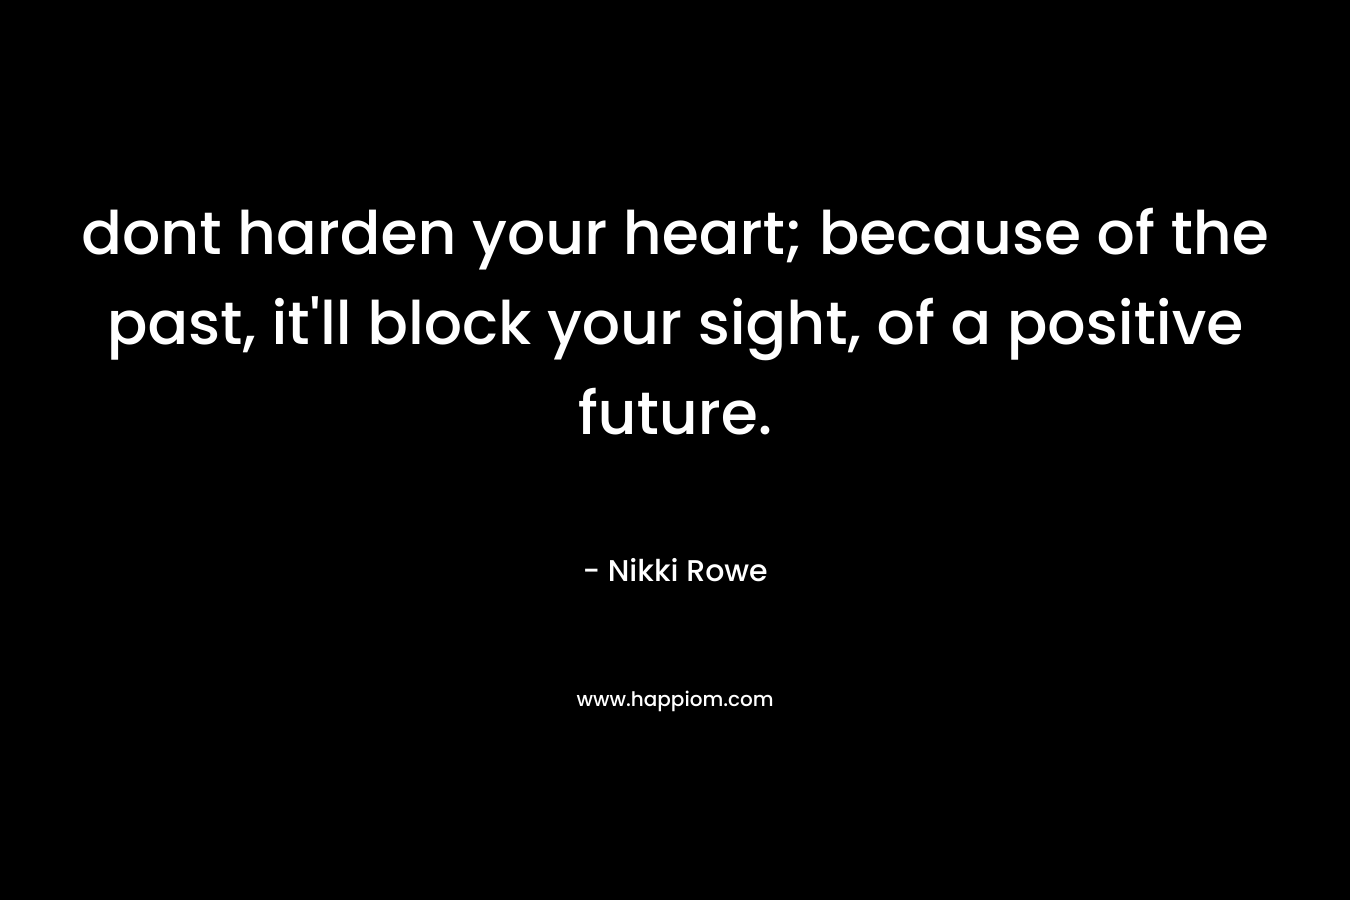 dont harden your heart; because of the past, it'll block your sight, of a positive future.